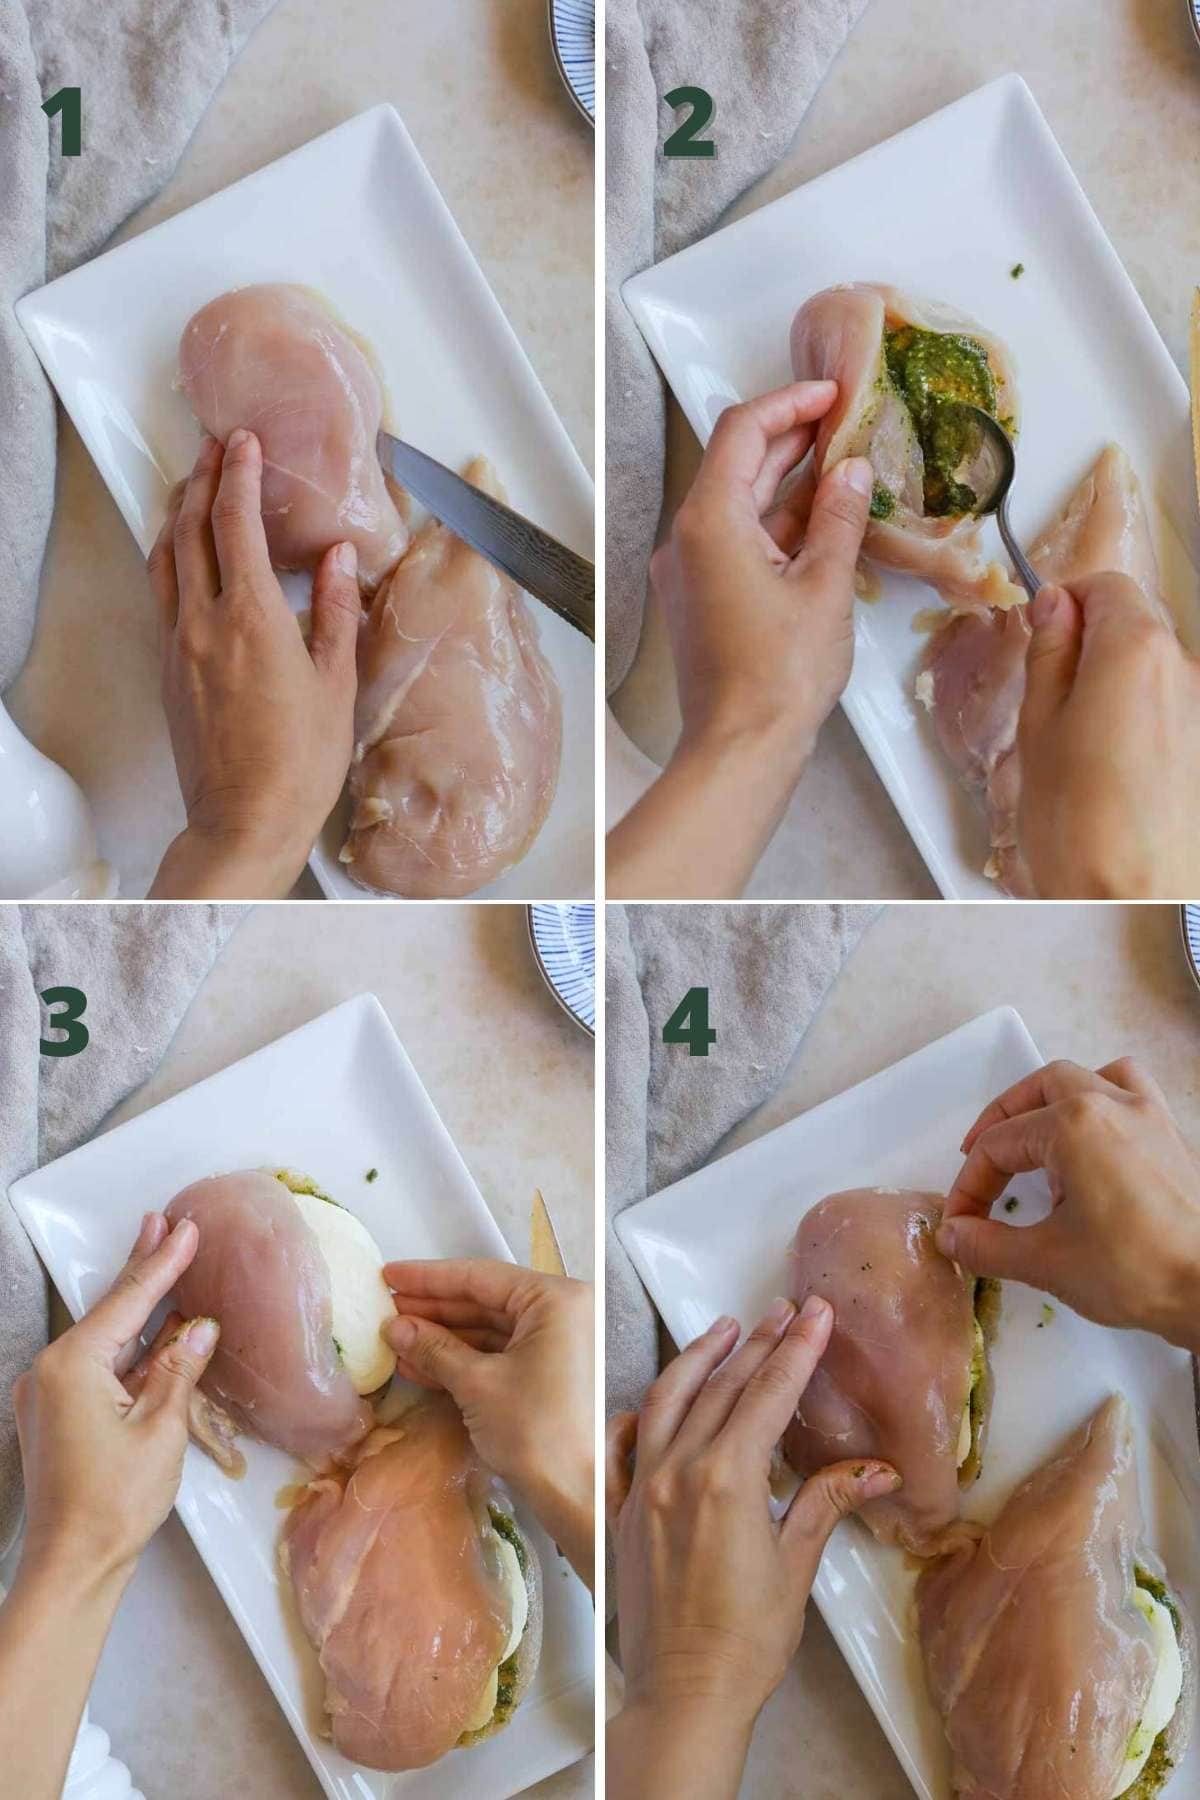 Steps to make pomodoro chicken including slicing the chicken to make a pocket, adding pesto and mozzarella, and sealing with toothpicks.